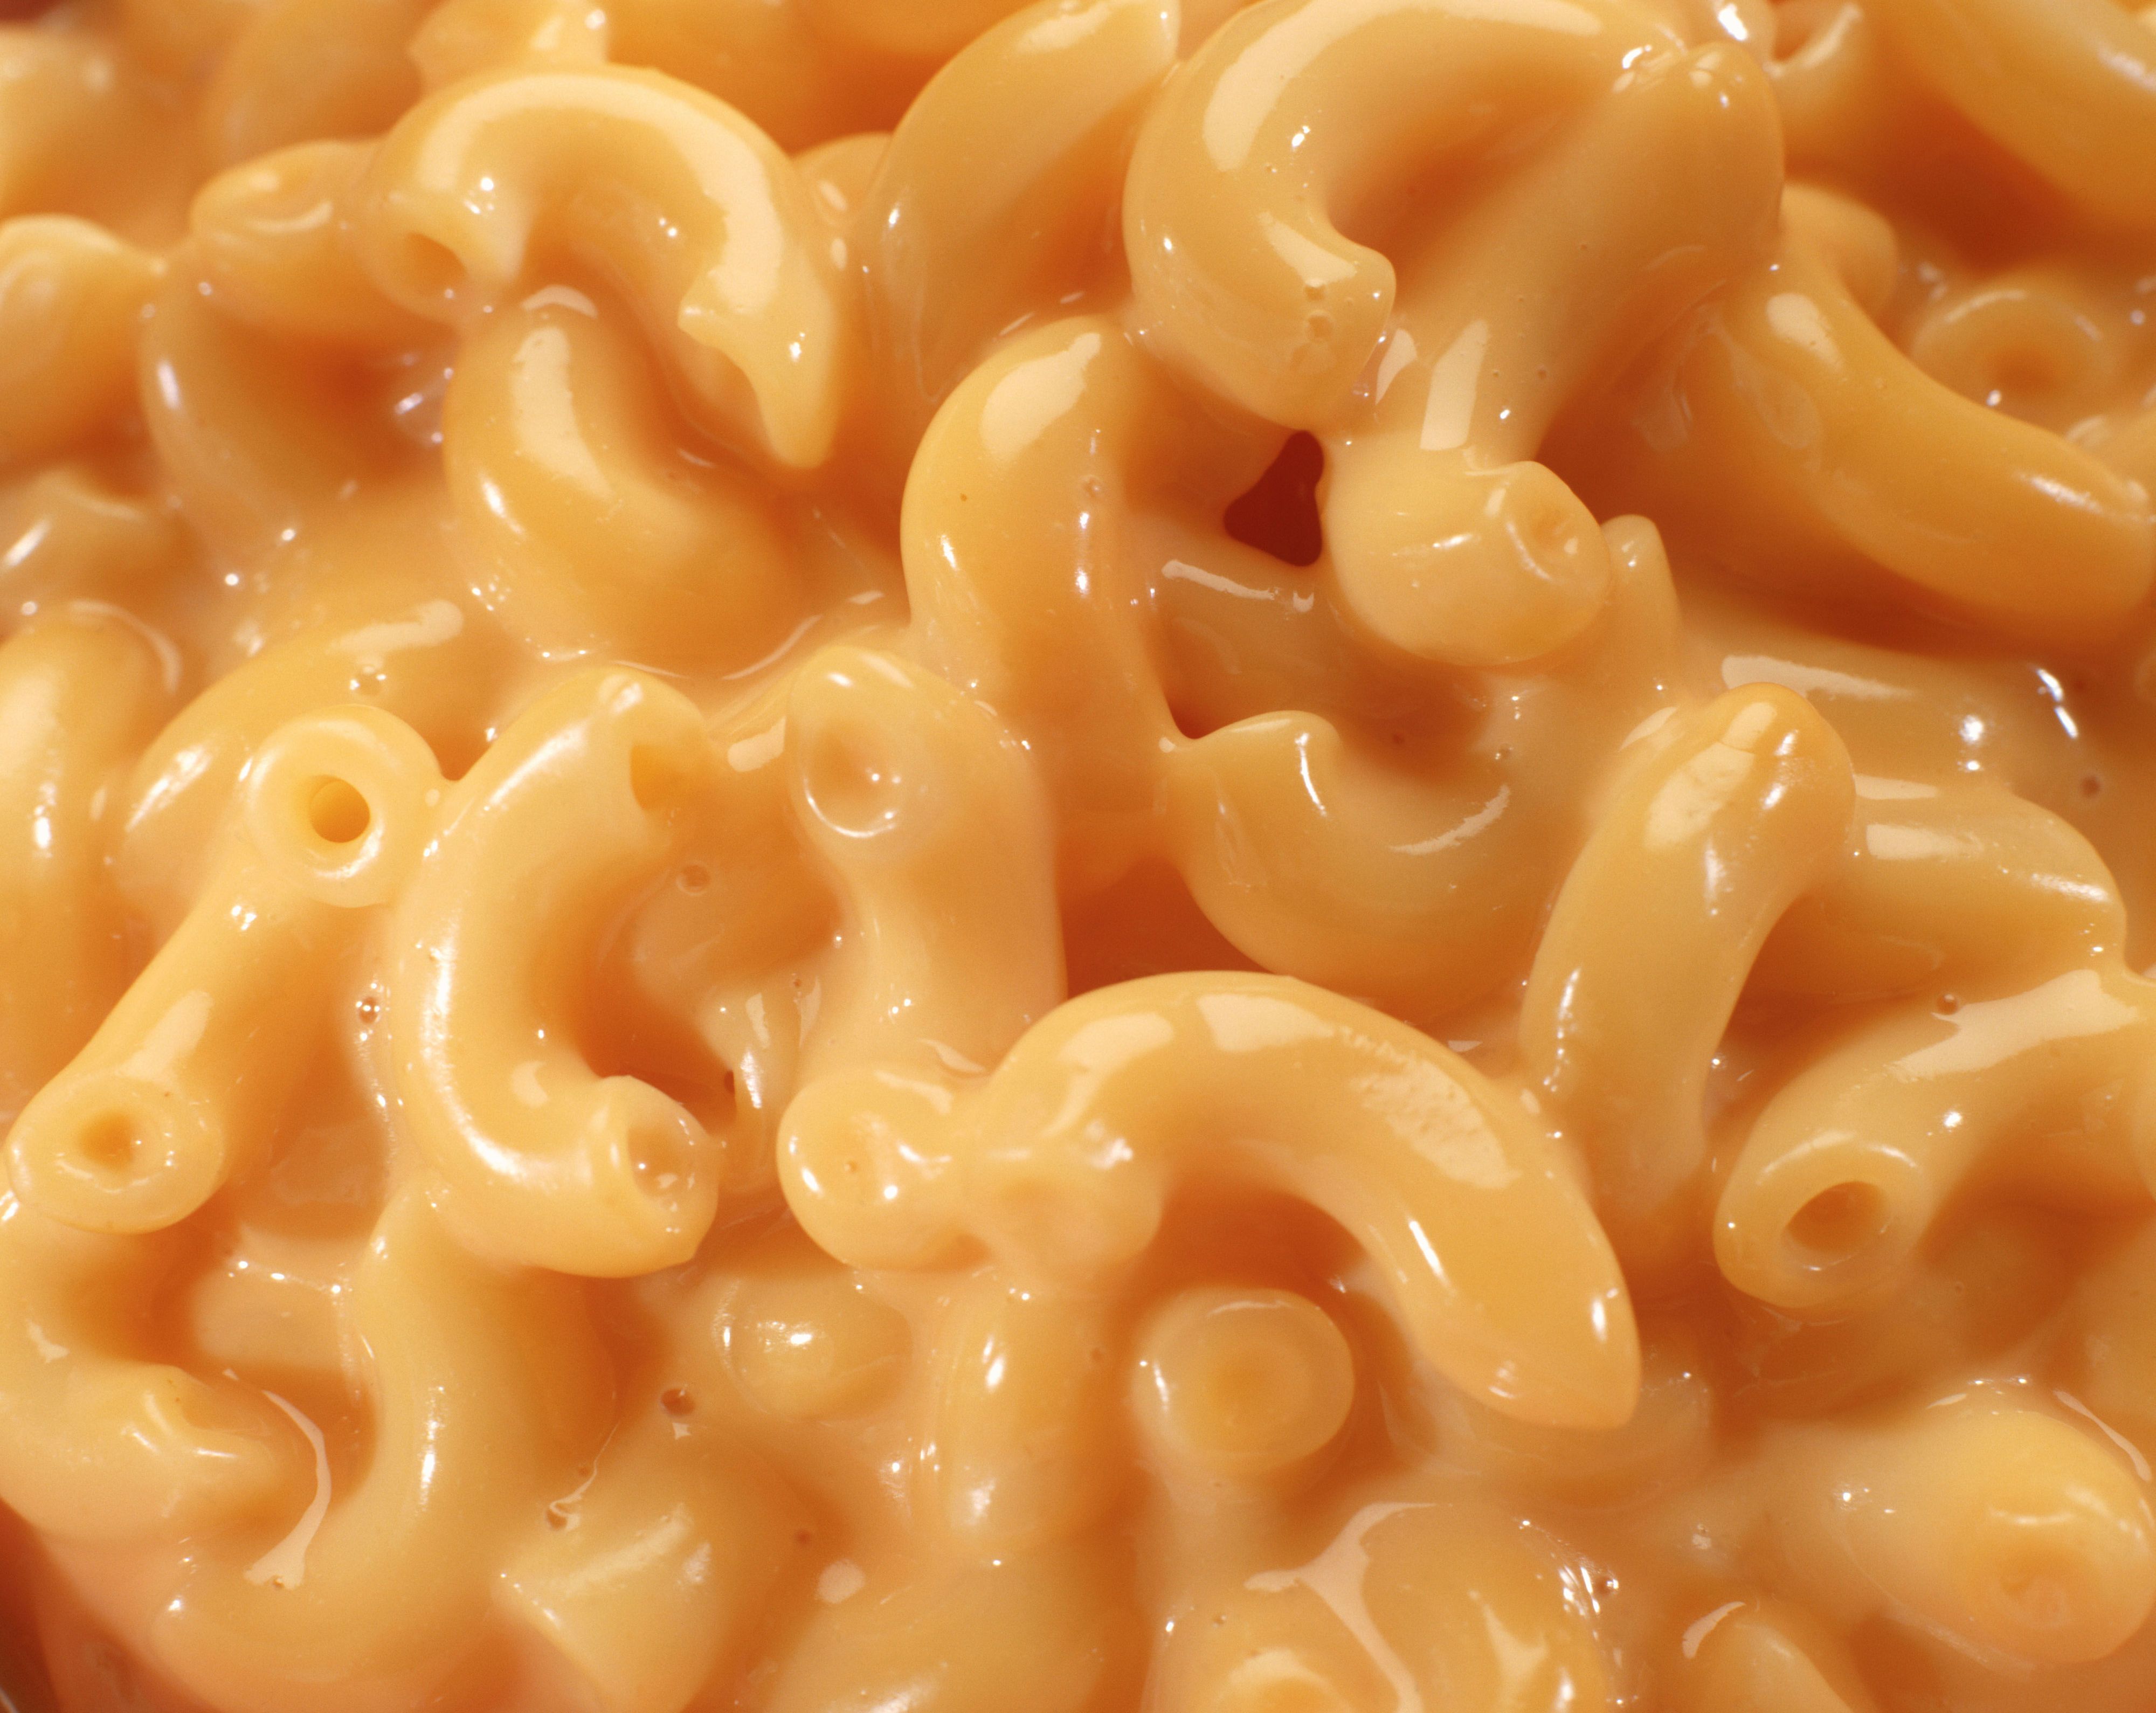 what is the most popular cheese for macaroni and cheese